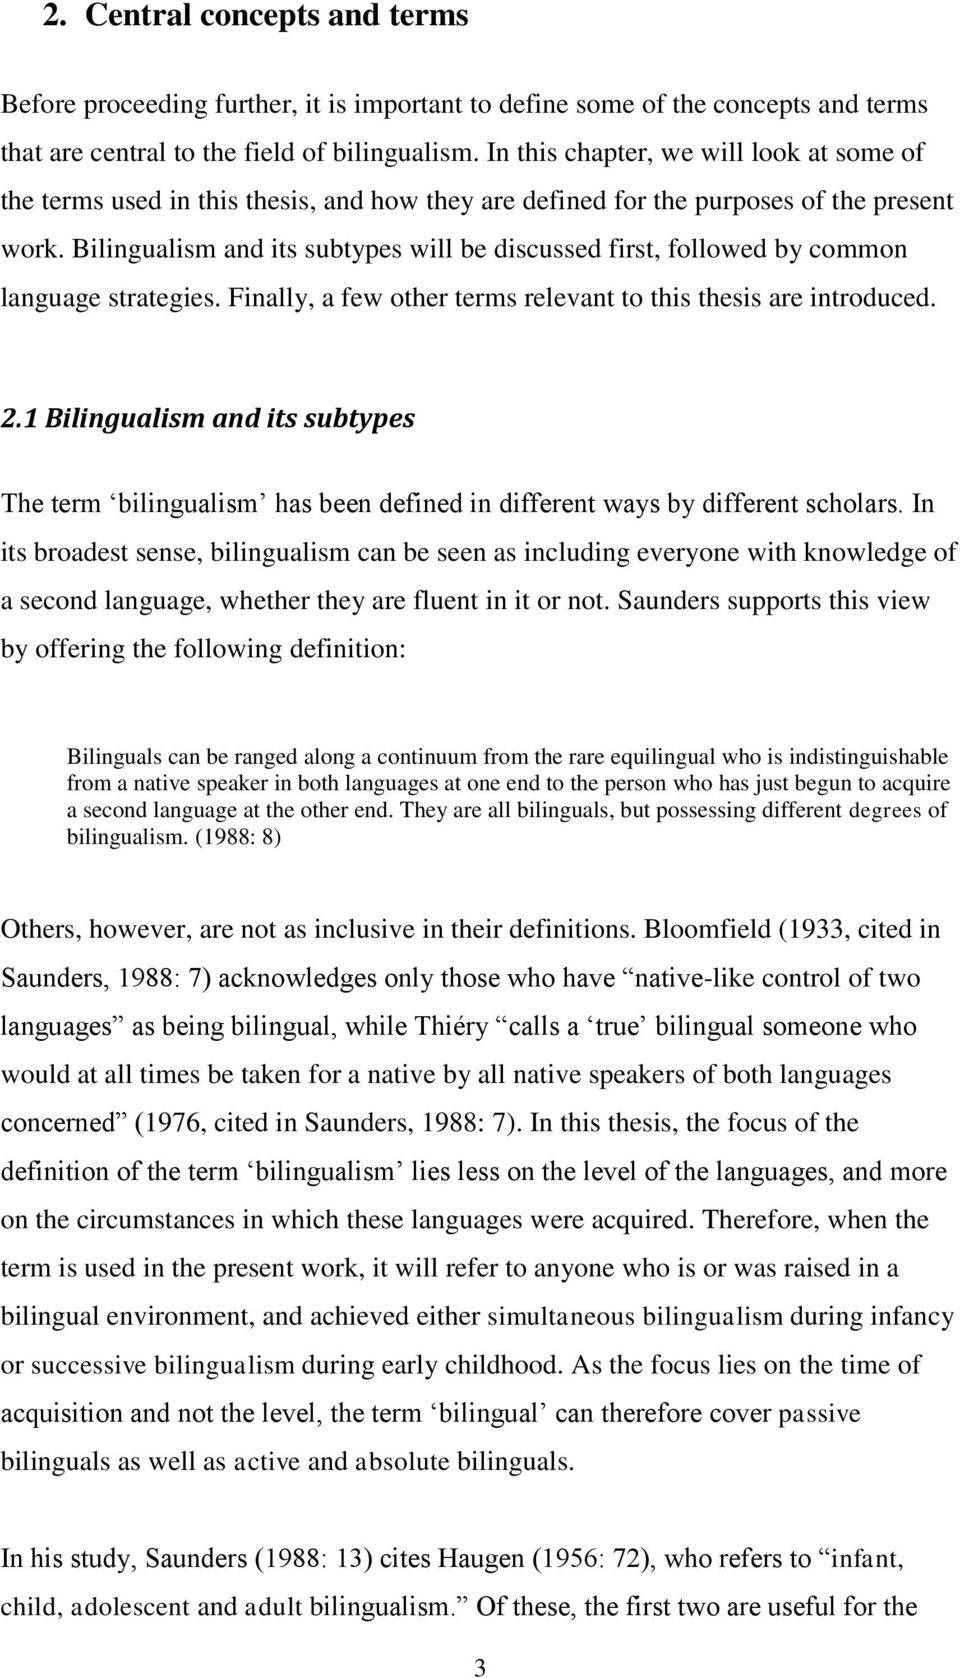 Bilingualism and its subtypes will be discussed first, followed by common language strategies. Finally, a few other terms relevant to this thesis are introduced. 2.